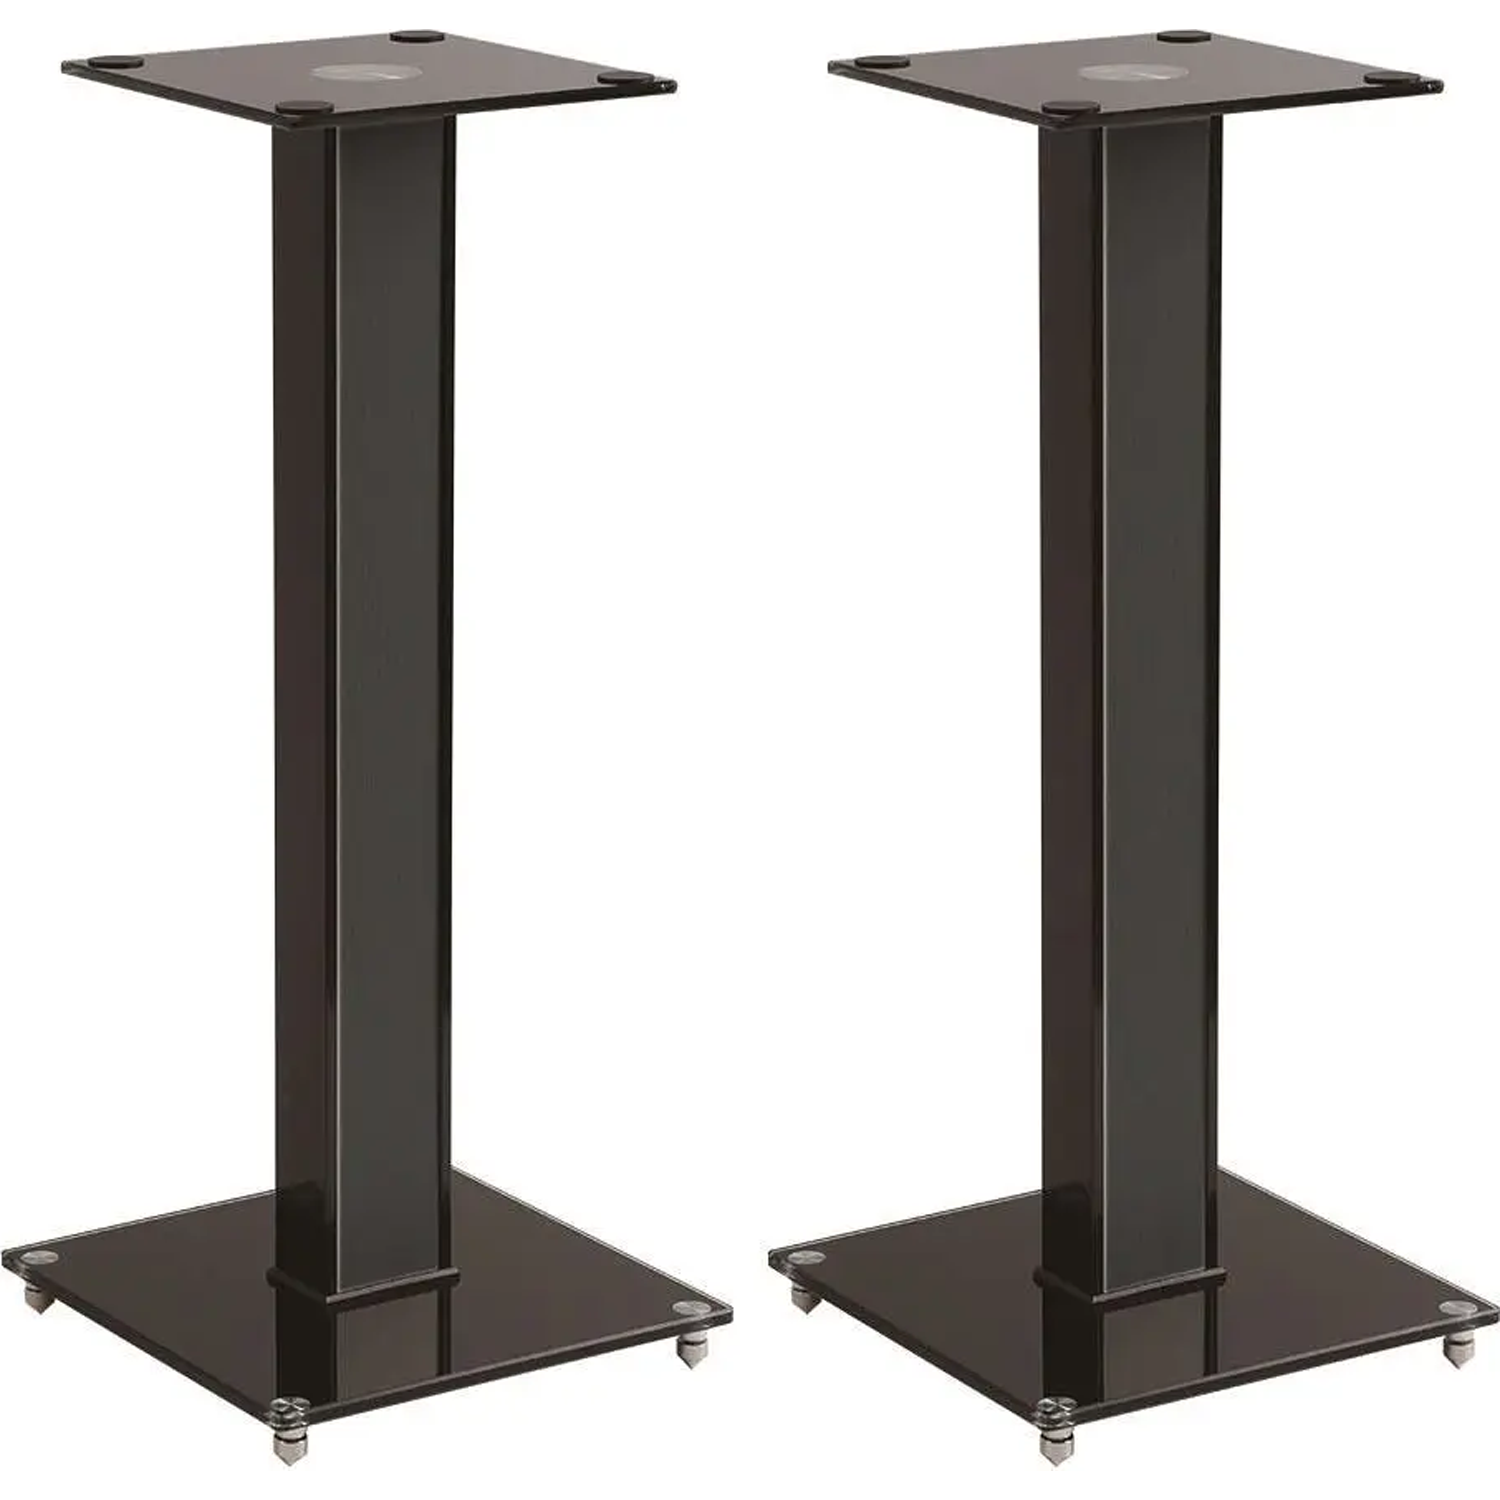 ETHEREAL OPEN BOX Helios AS-SPKR-5 PAIR 24in Speaker Stands with Cable Management